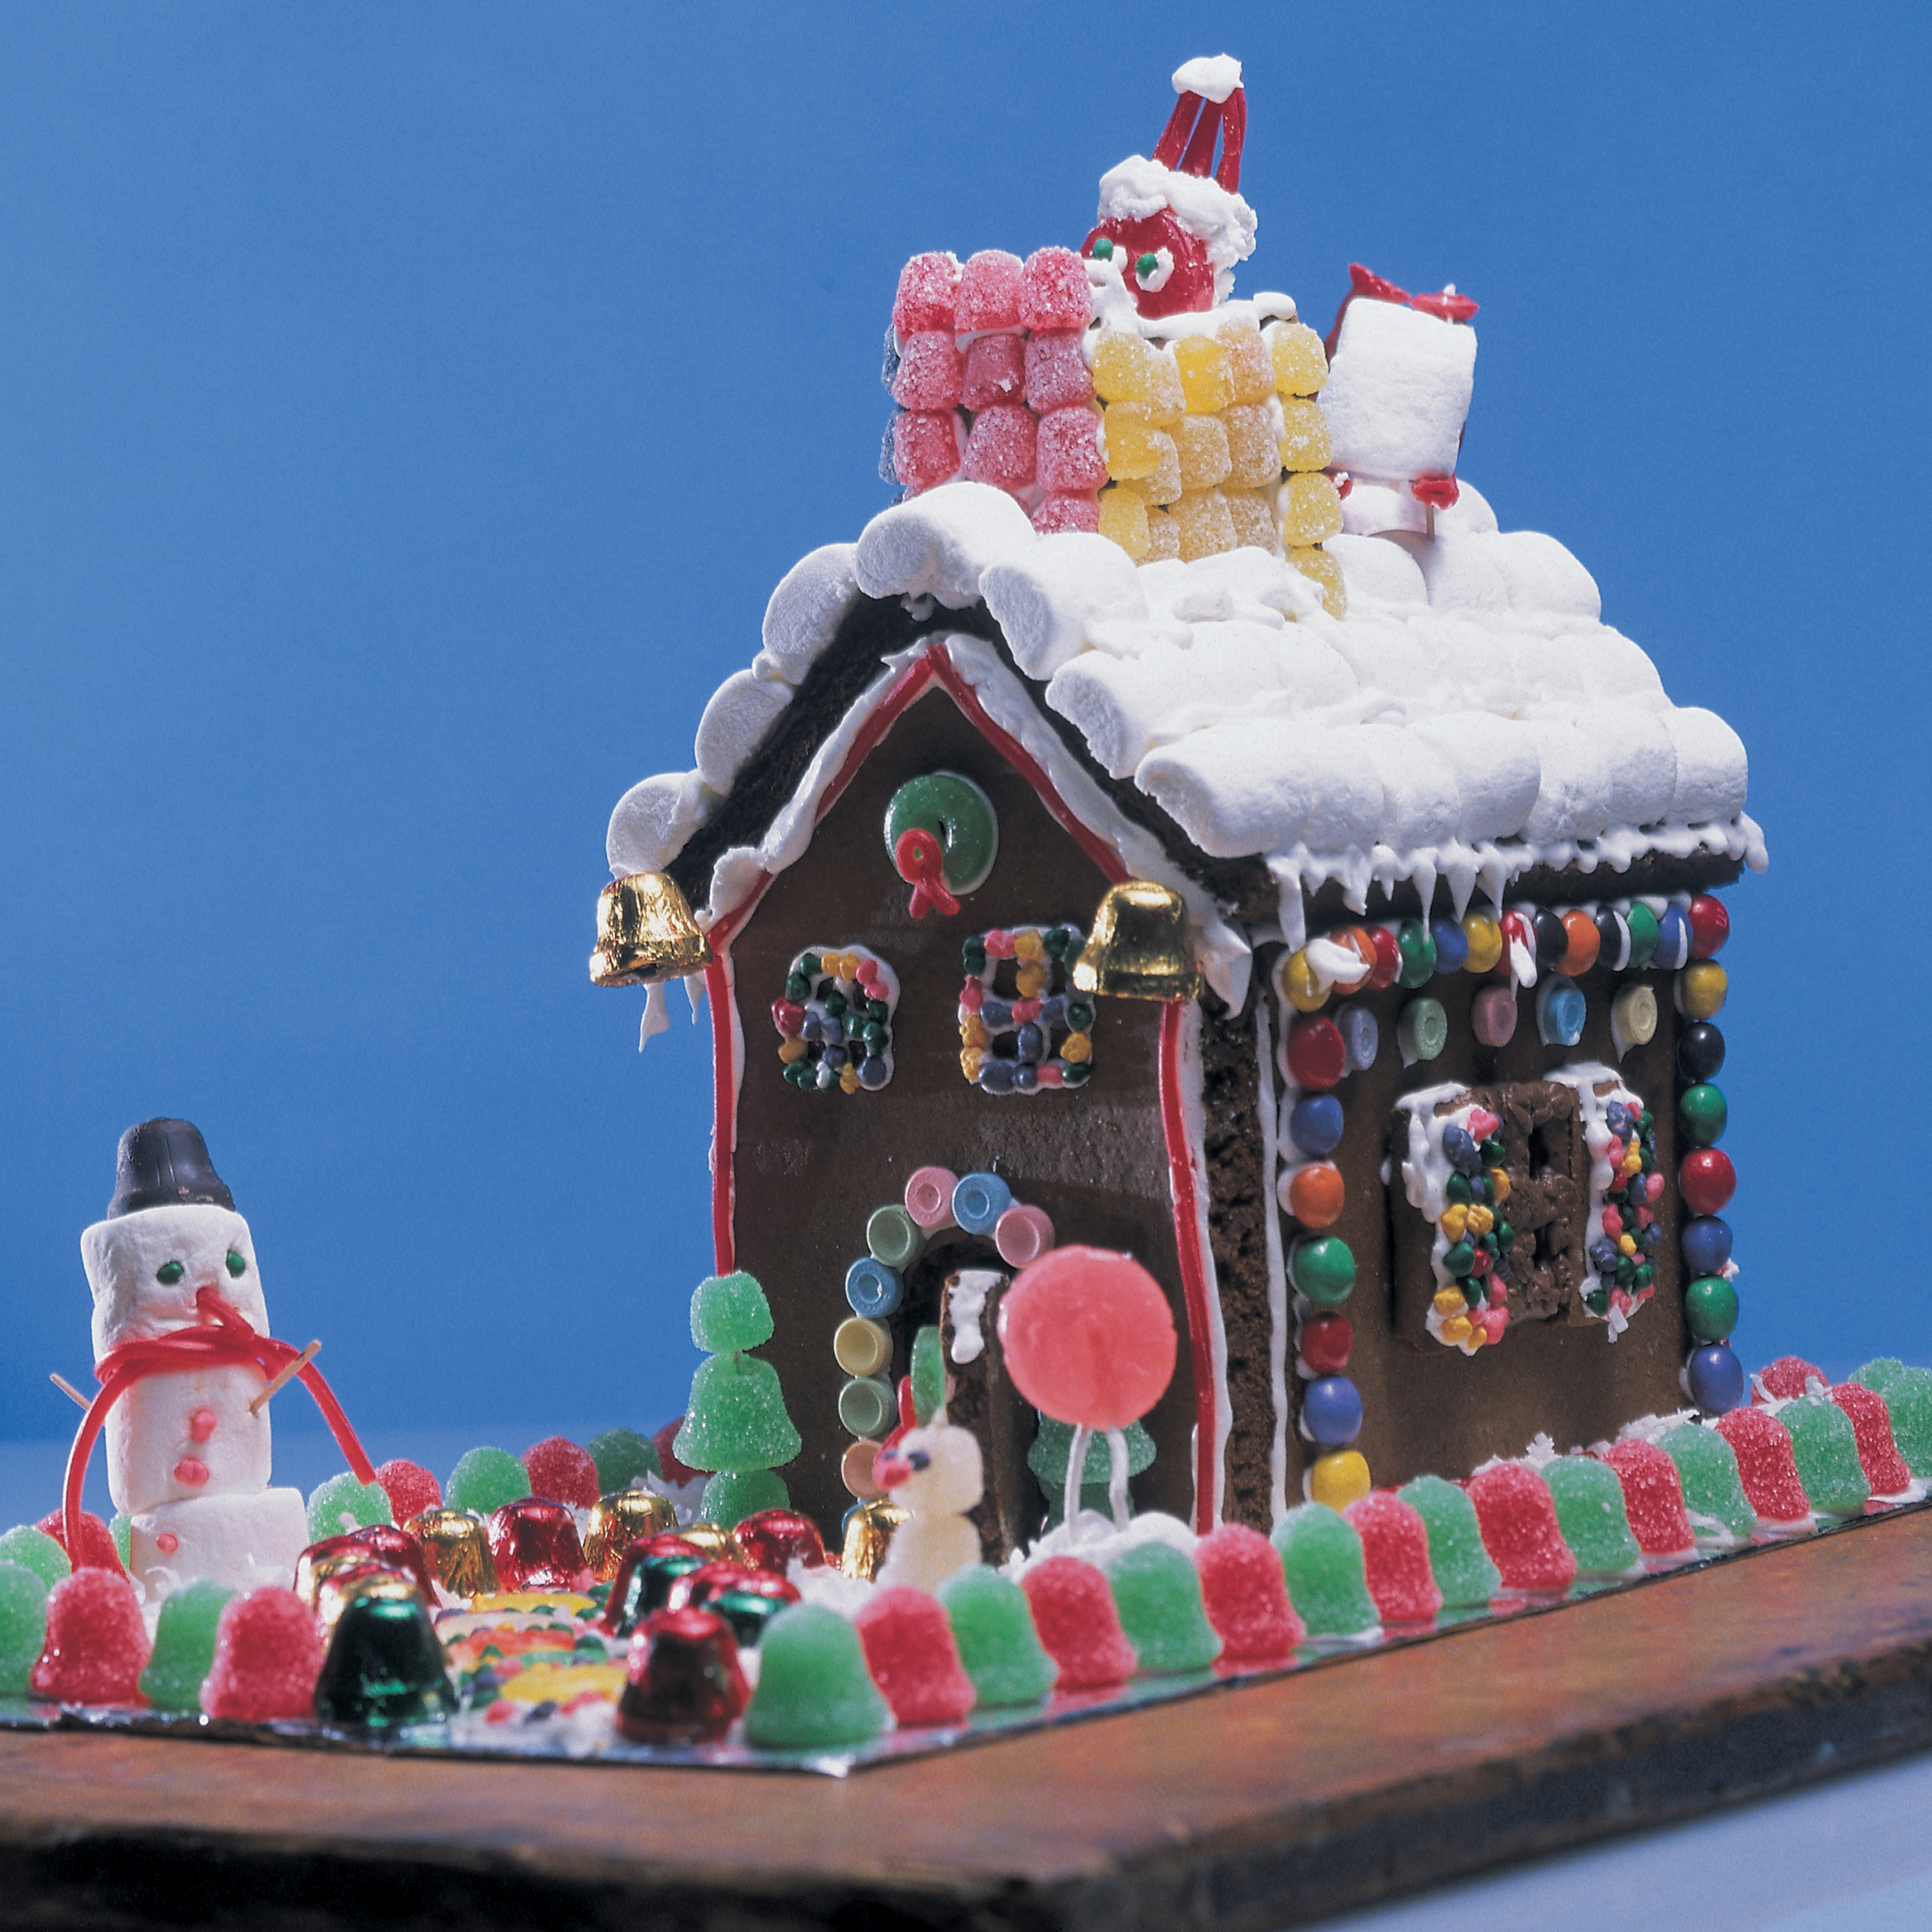 homemade gingerbread house with gumdrop fence and snowman